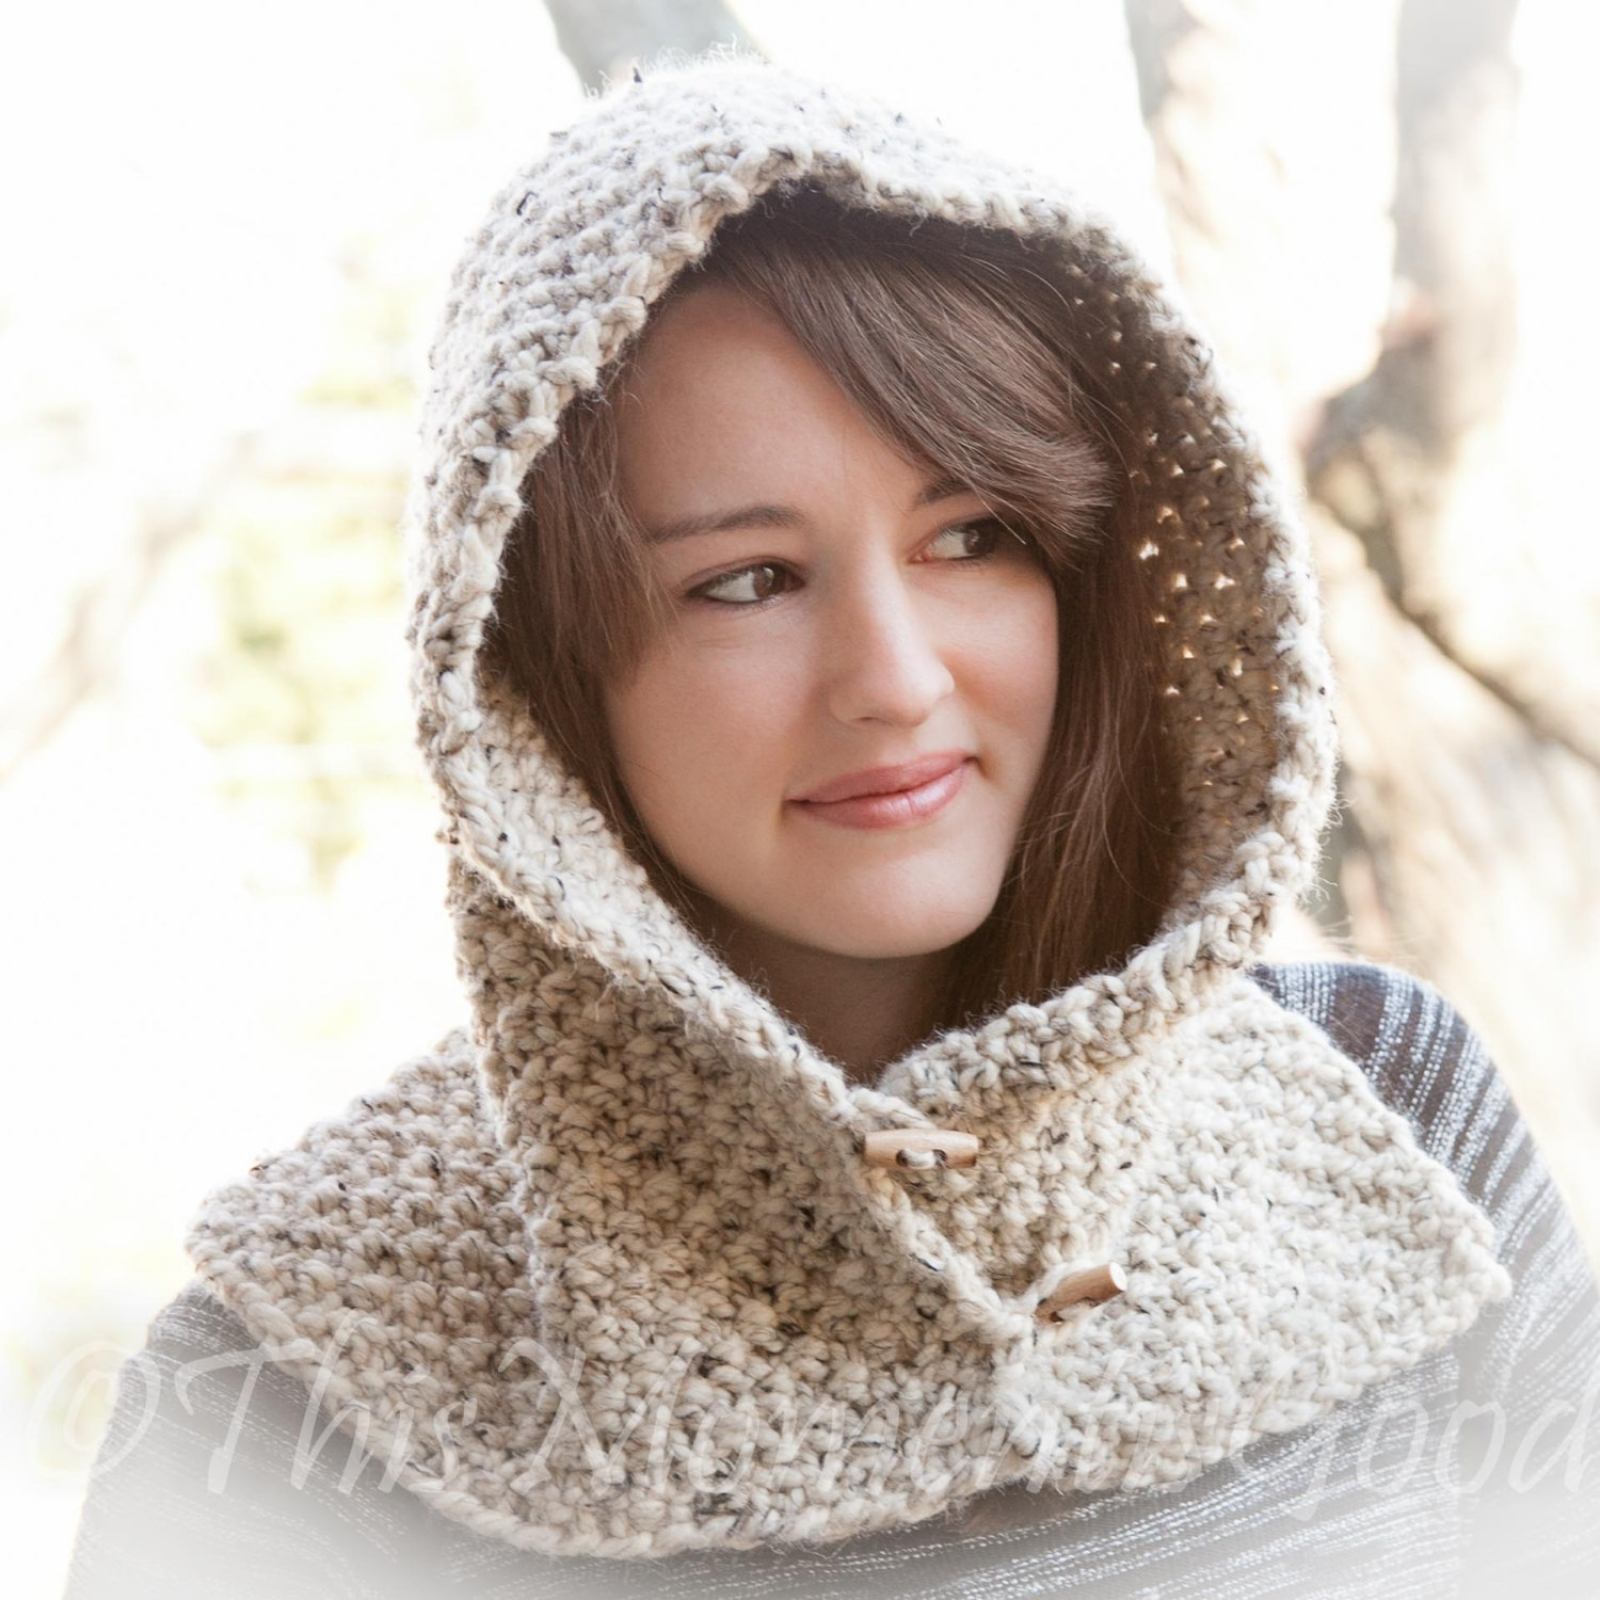 Loom Knit Hooded Scarf Pattern Loom Knit Country Hood With Cowl Pattern Child Teen Adult Sizes Chunky Oversized Hood Cowl Pattern Instant Pdf Pattern Download